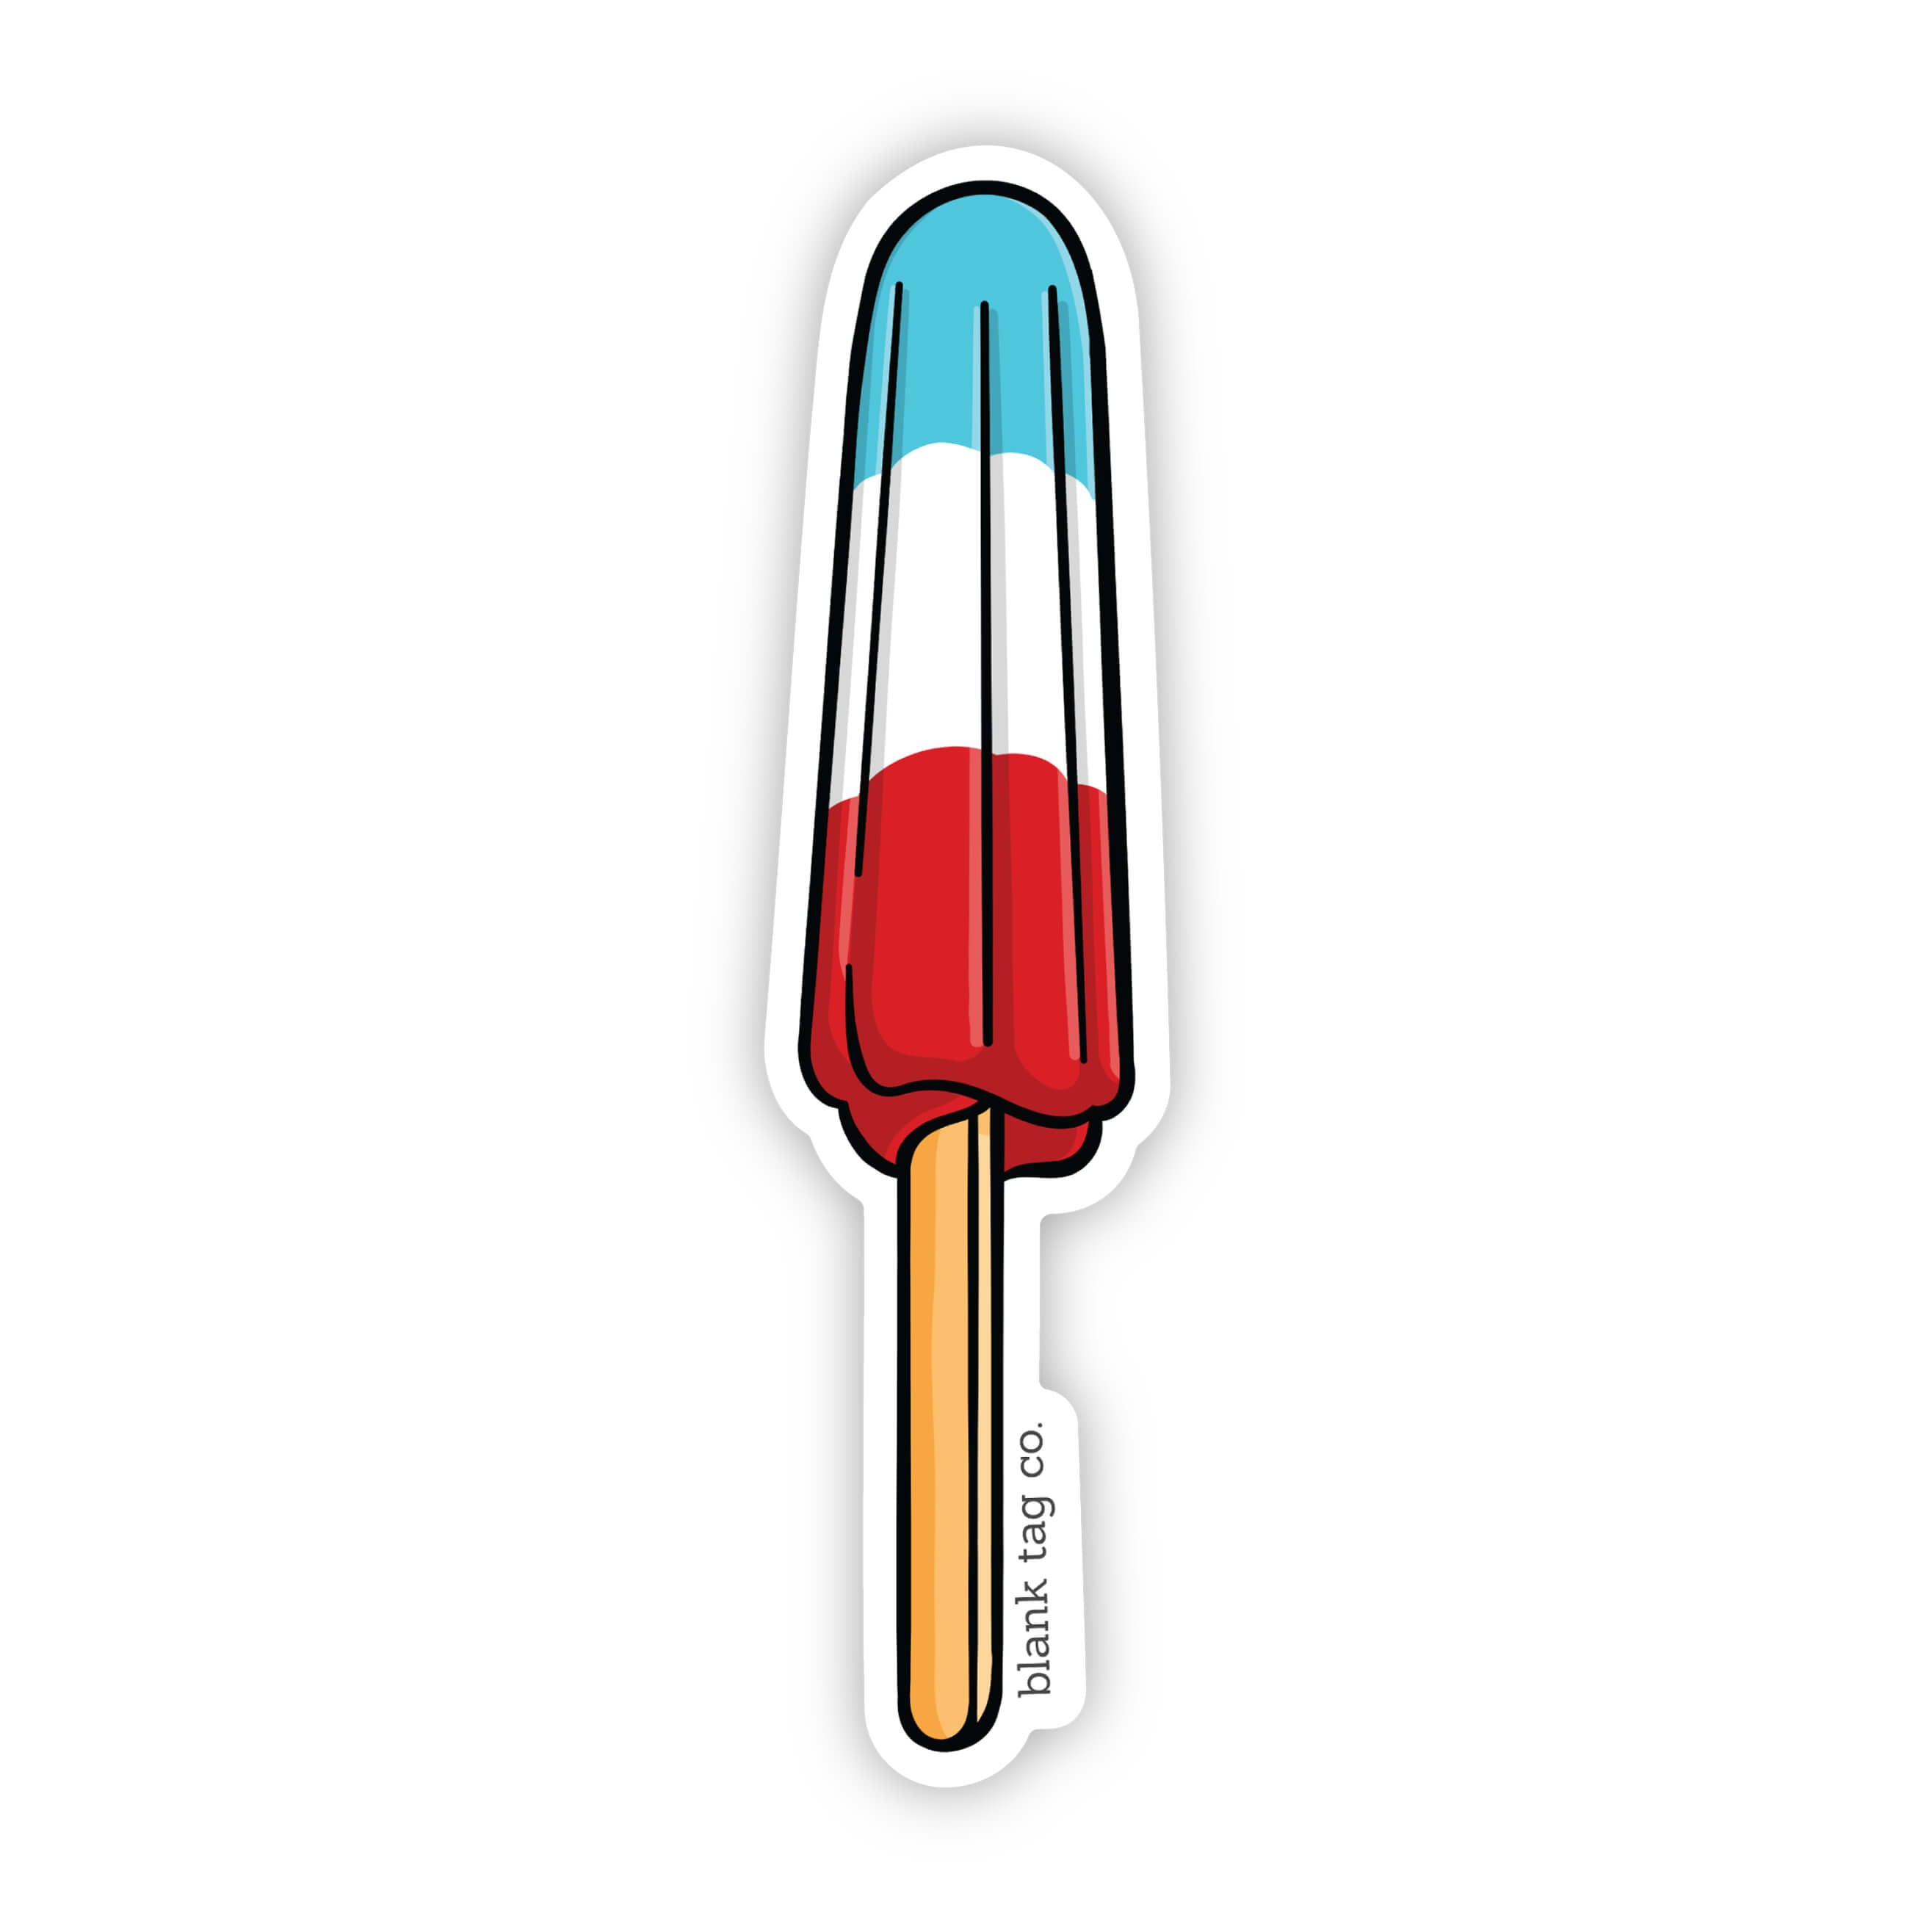 The Popsicle Sticker